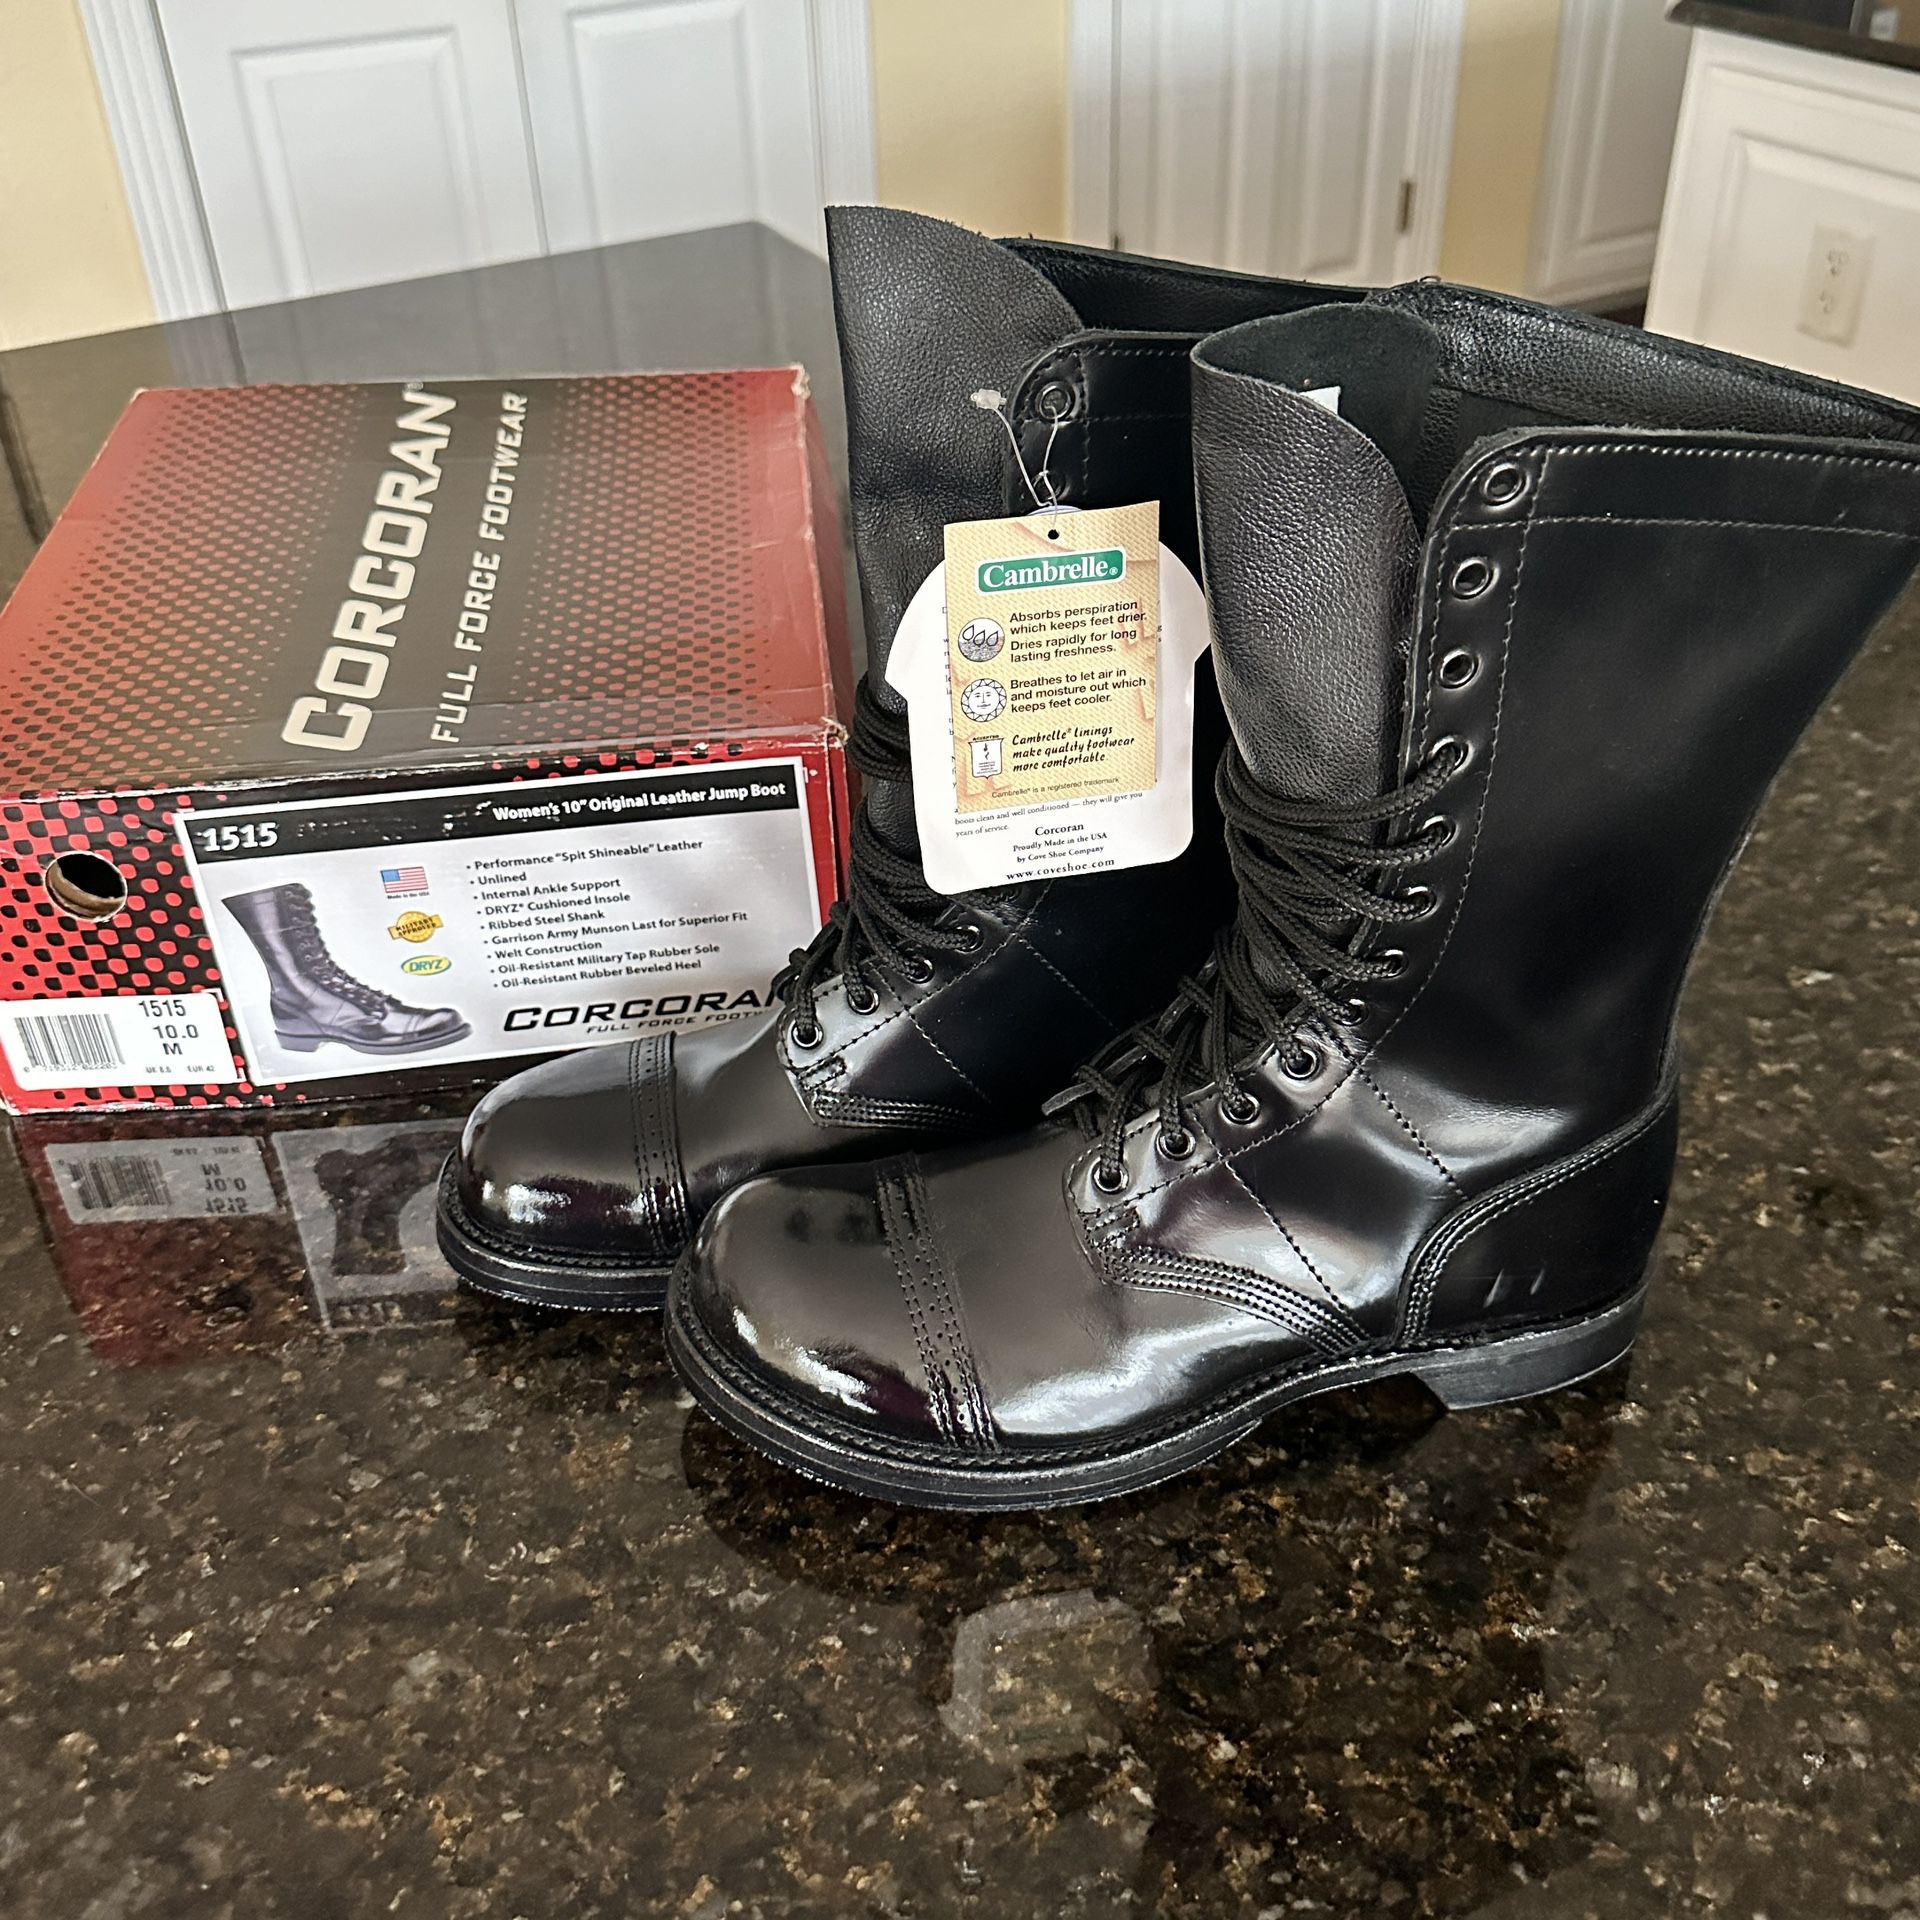 New in Box Women’s Corcoran Jump Boots